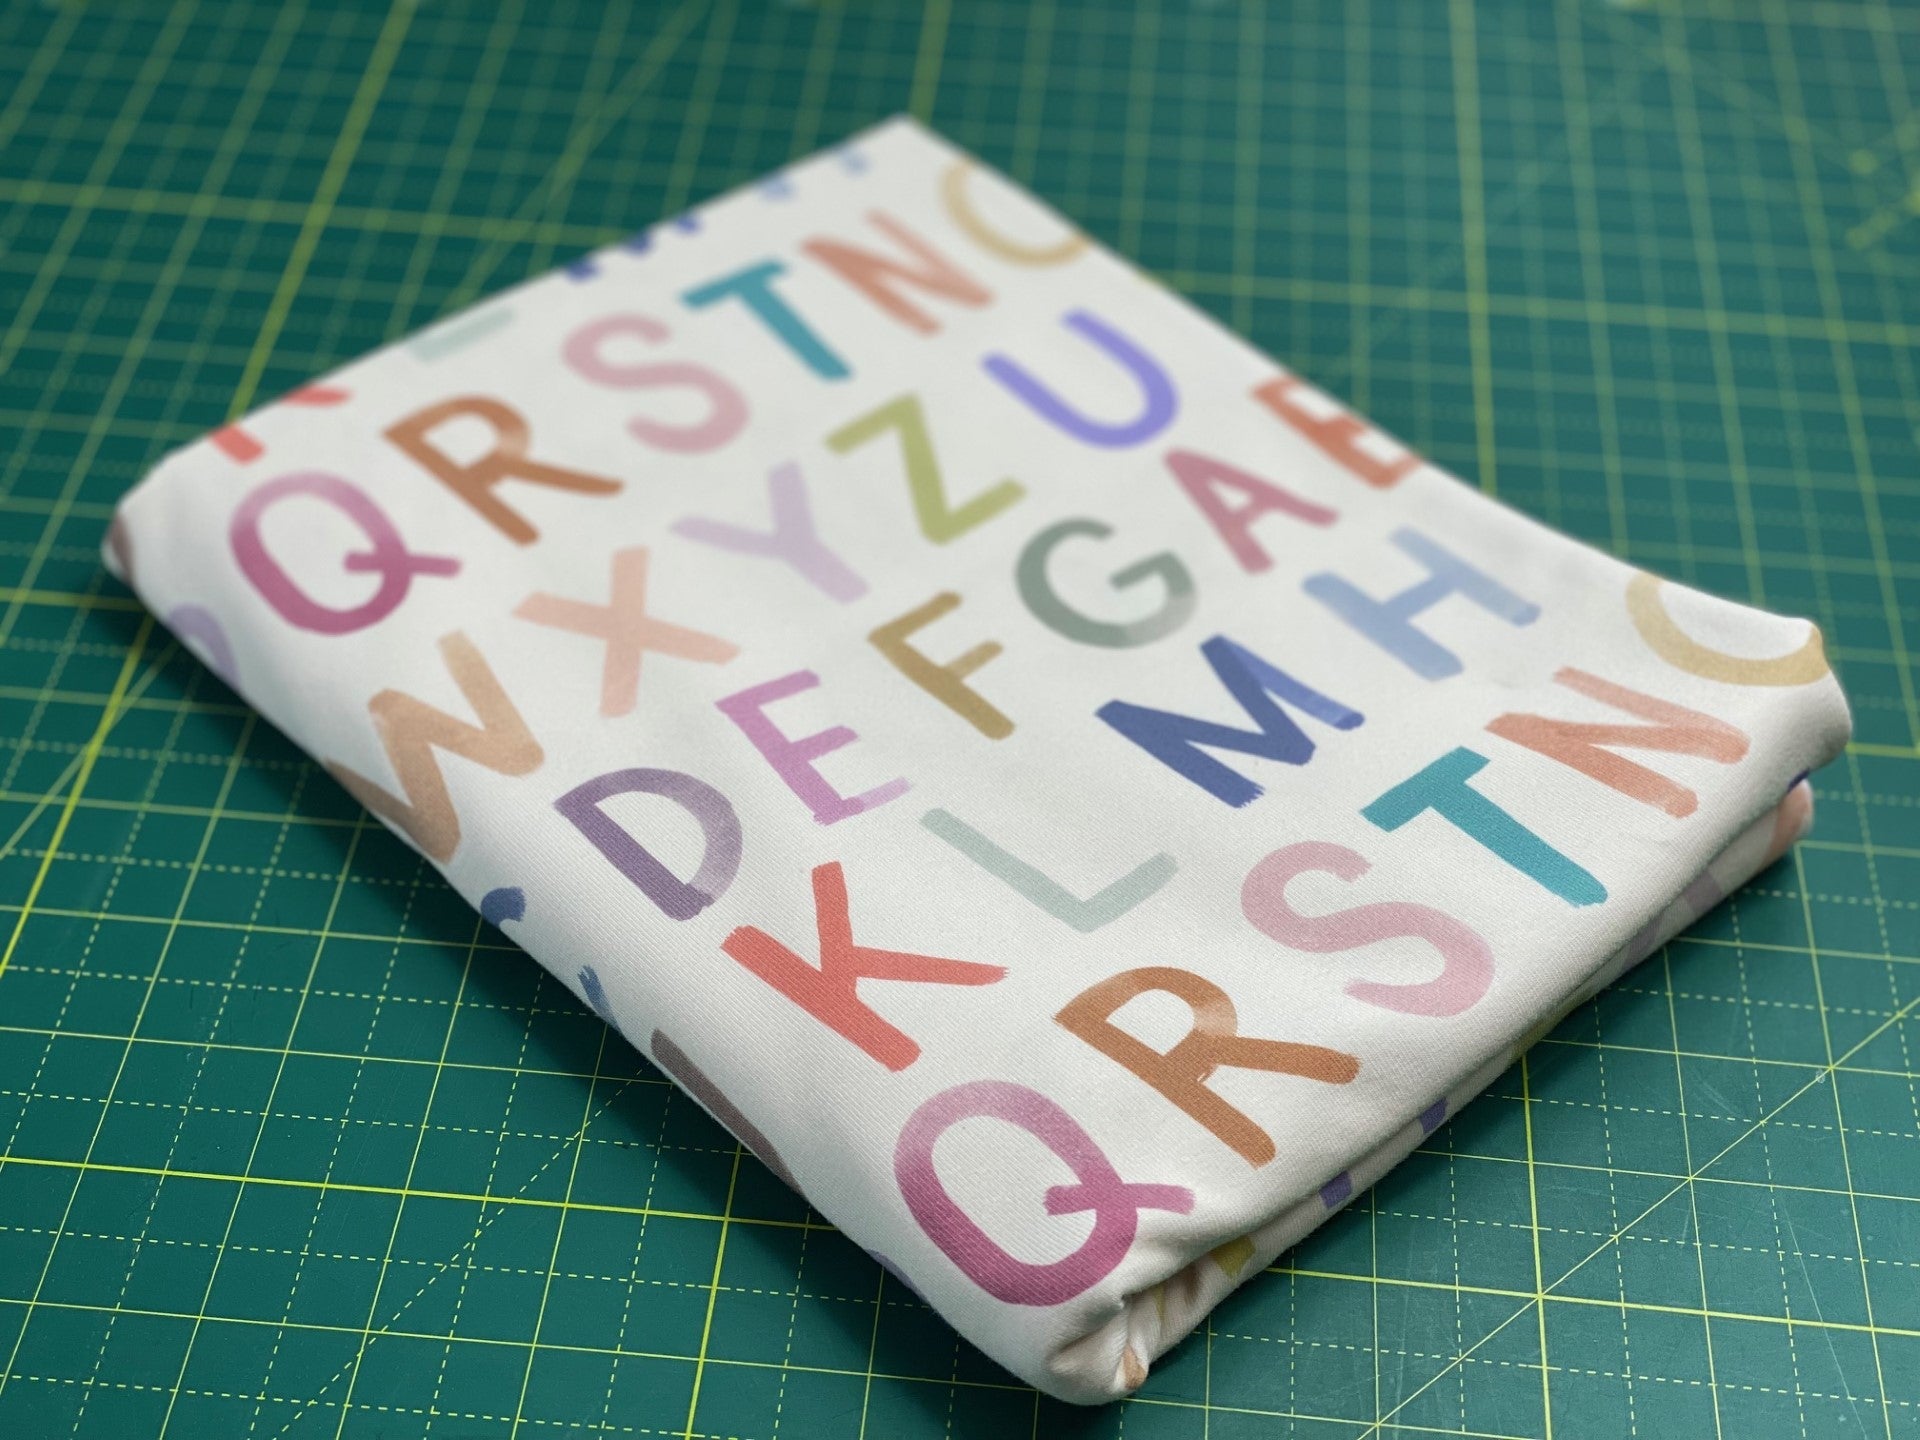 In Stock: Family Fabrics - ABC Big - Large Letters - 220 gsm Jersey - By the 1/2 yd - Little Rhody Sewing Co.